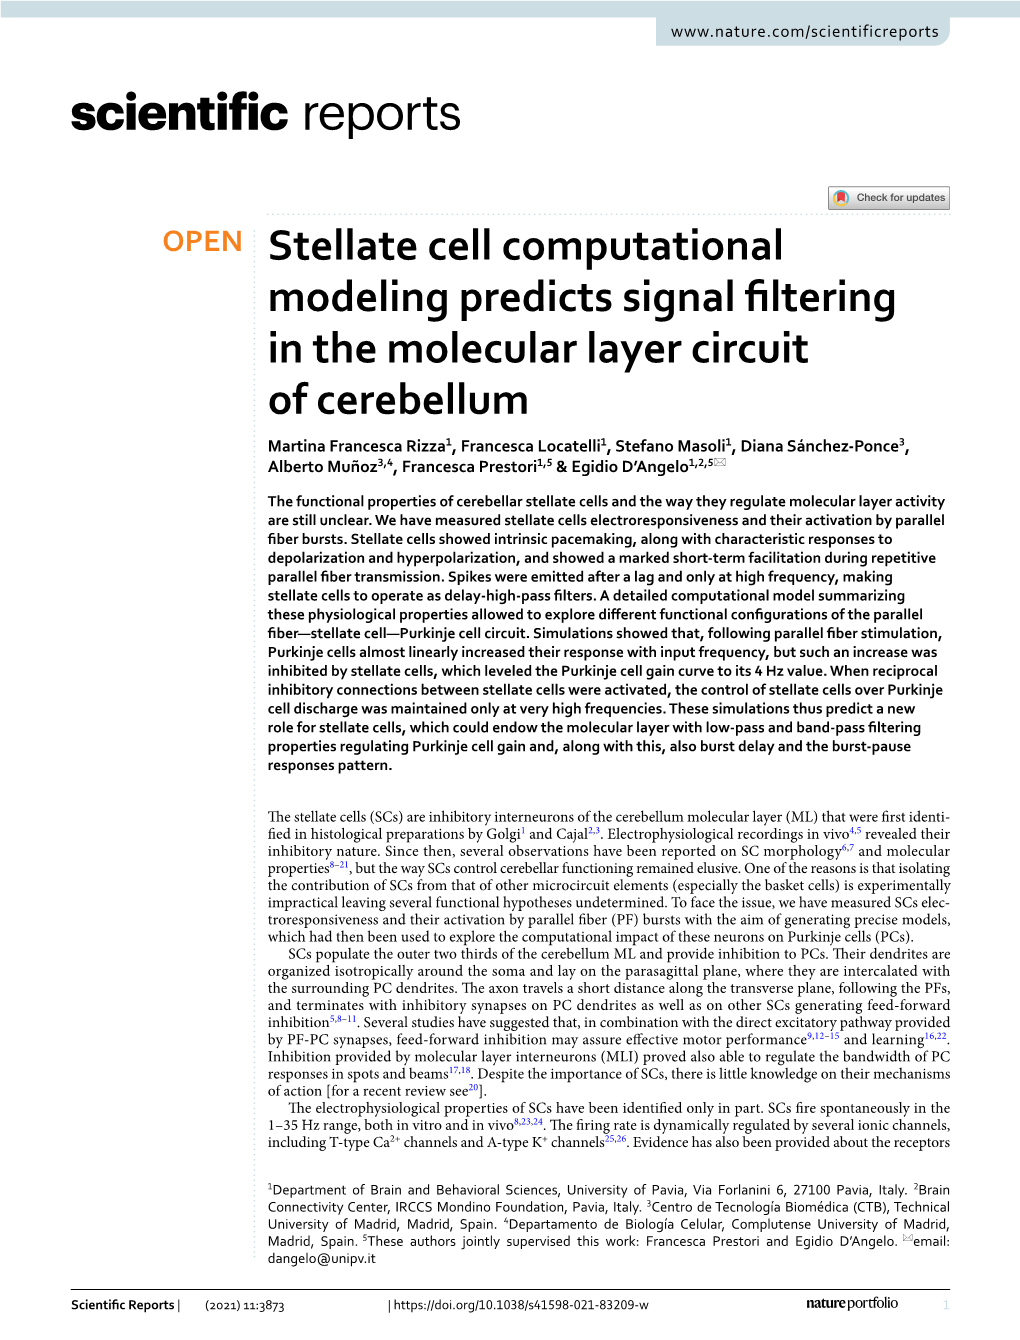 Stellate Cell Computational Modeling Predicts Signal Filtering in the Molecular Layer Circuit of Cerebellum